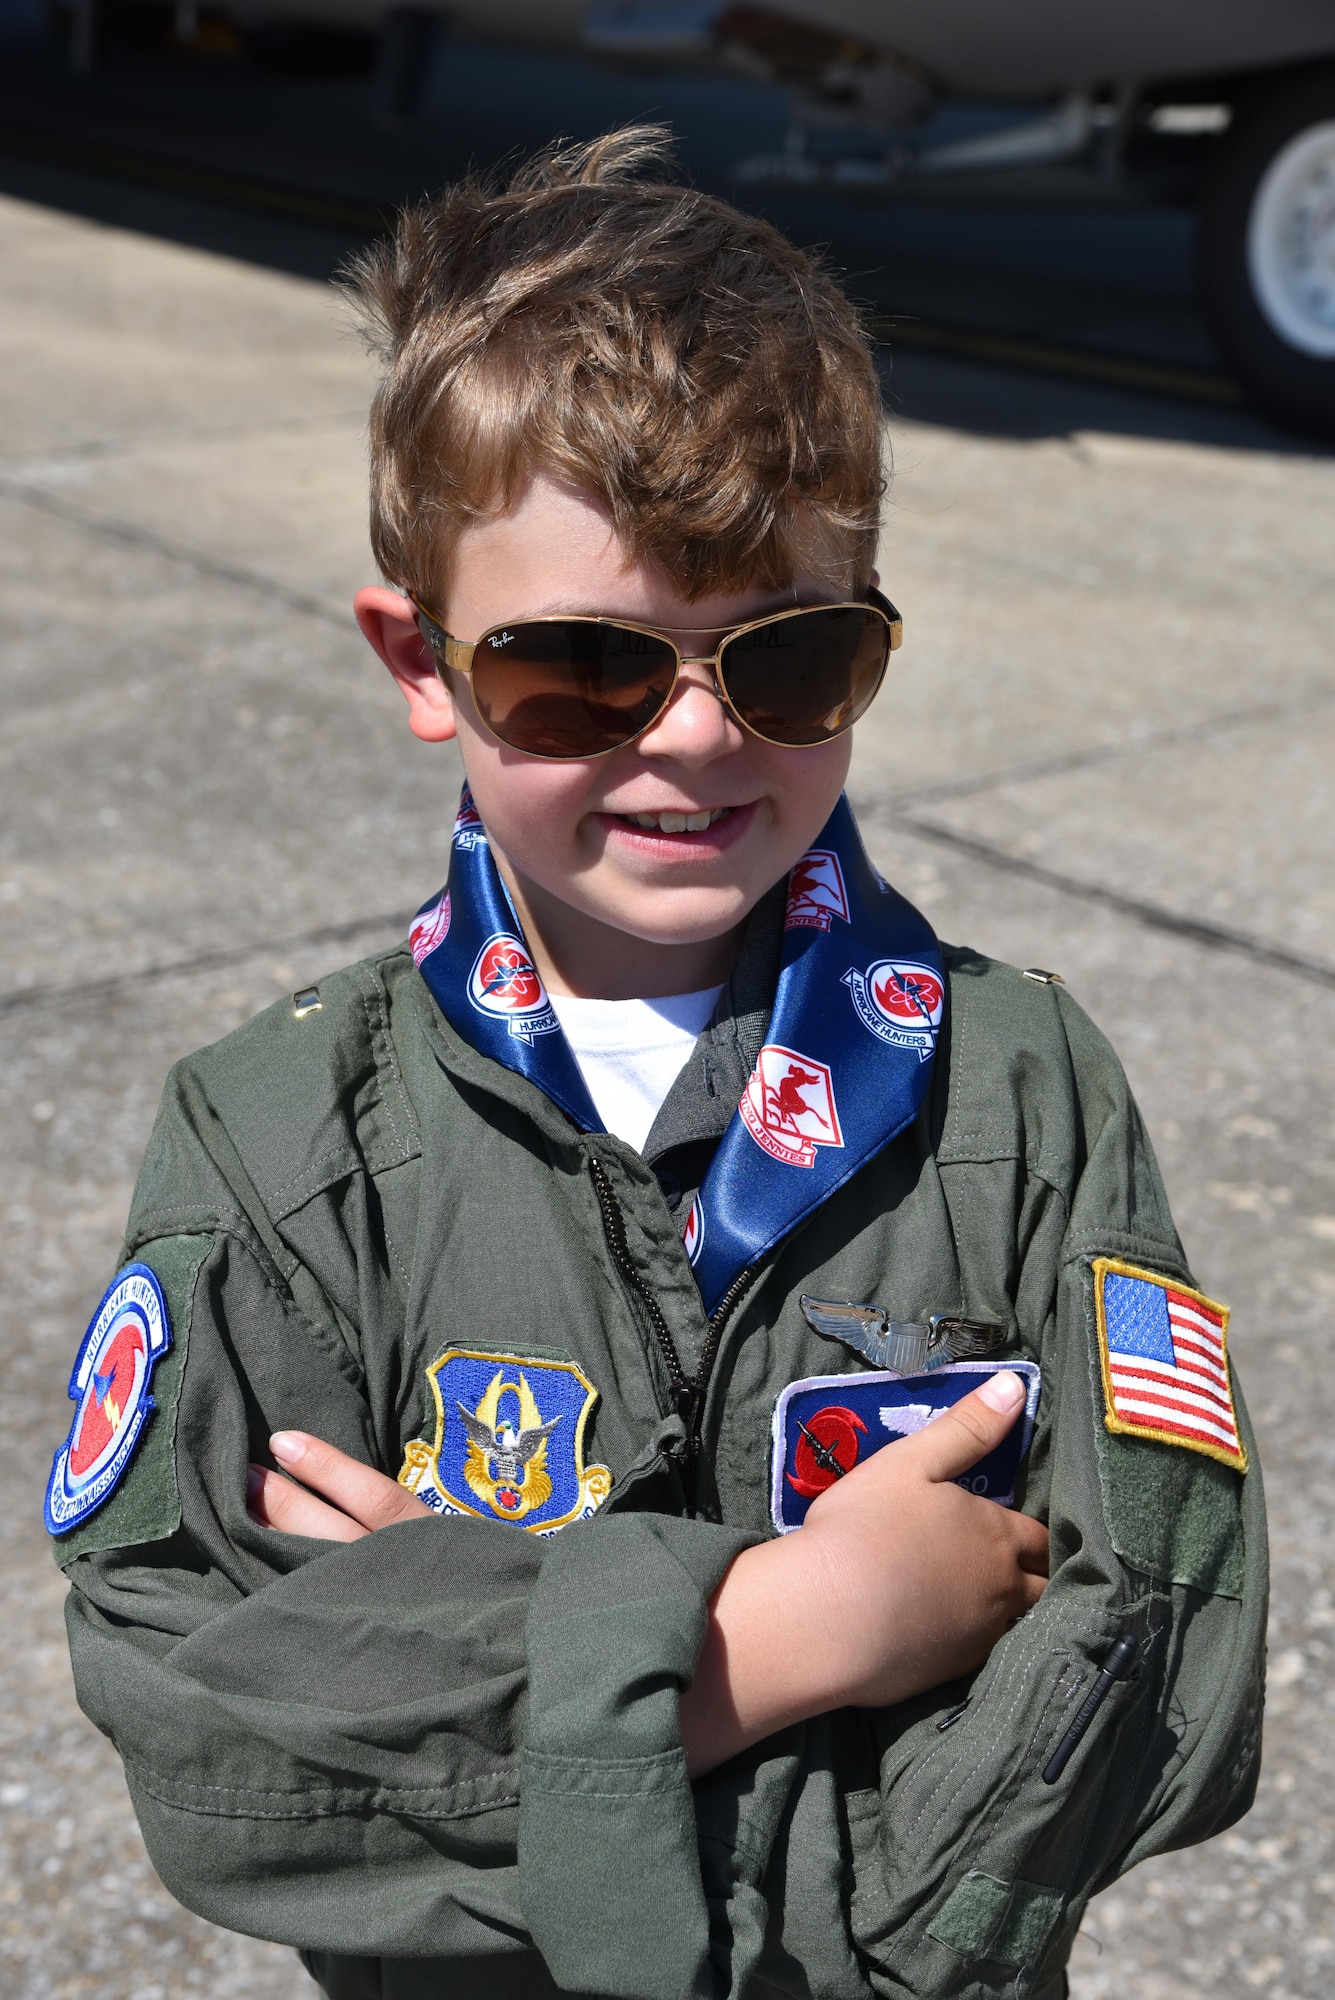 Jon Bryant “JB” Orso of the Mobile, Alabama, area became the 403rd Wing’s first Pilot for a Day at Keesler Air Force Base, Mississippi, April 26, 2016. The purpose of the Pilot for a Day program is to reach out to the community by providing activities to children who live with a chronic or life-threatening disease or illness. Orso is in remission after receiving treatment for Acute Lymphoblastic Leukemia. (U.S. Air Force photo/Maj. Marnee A.C. Losurdo)